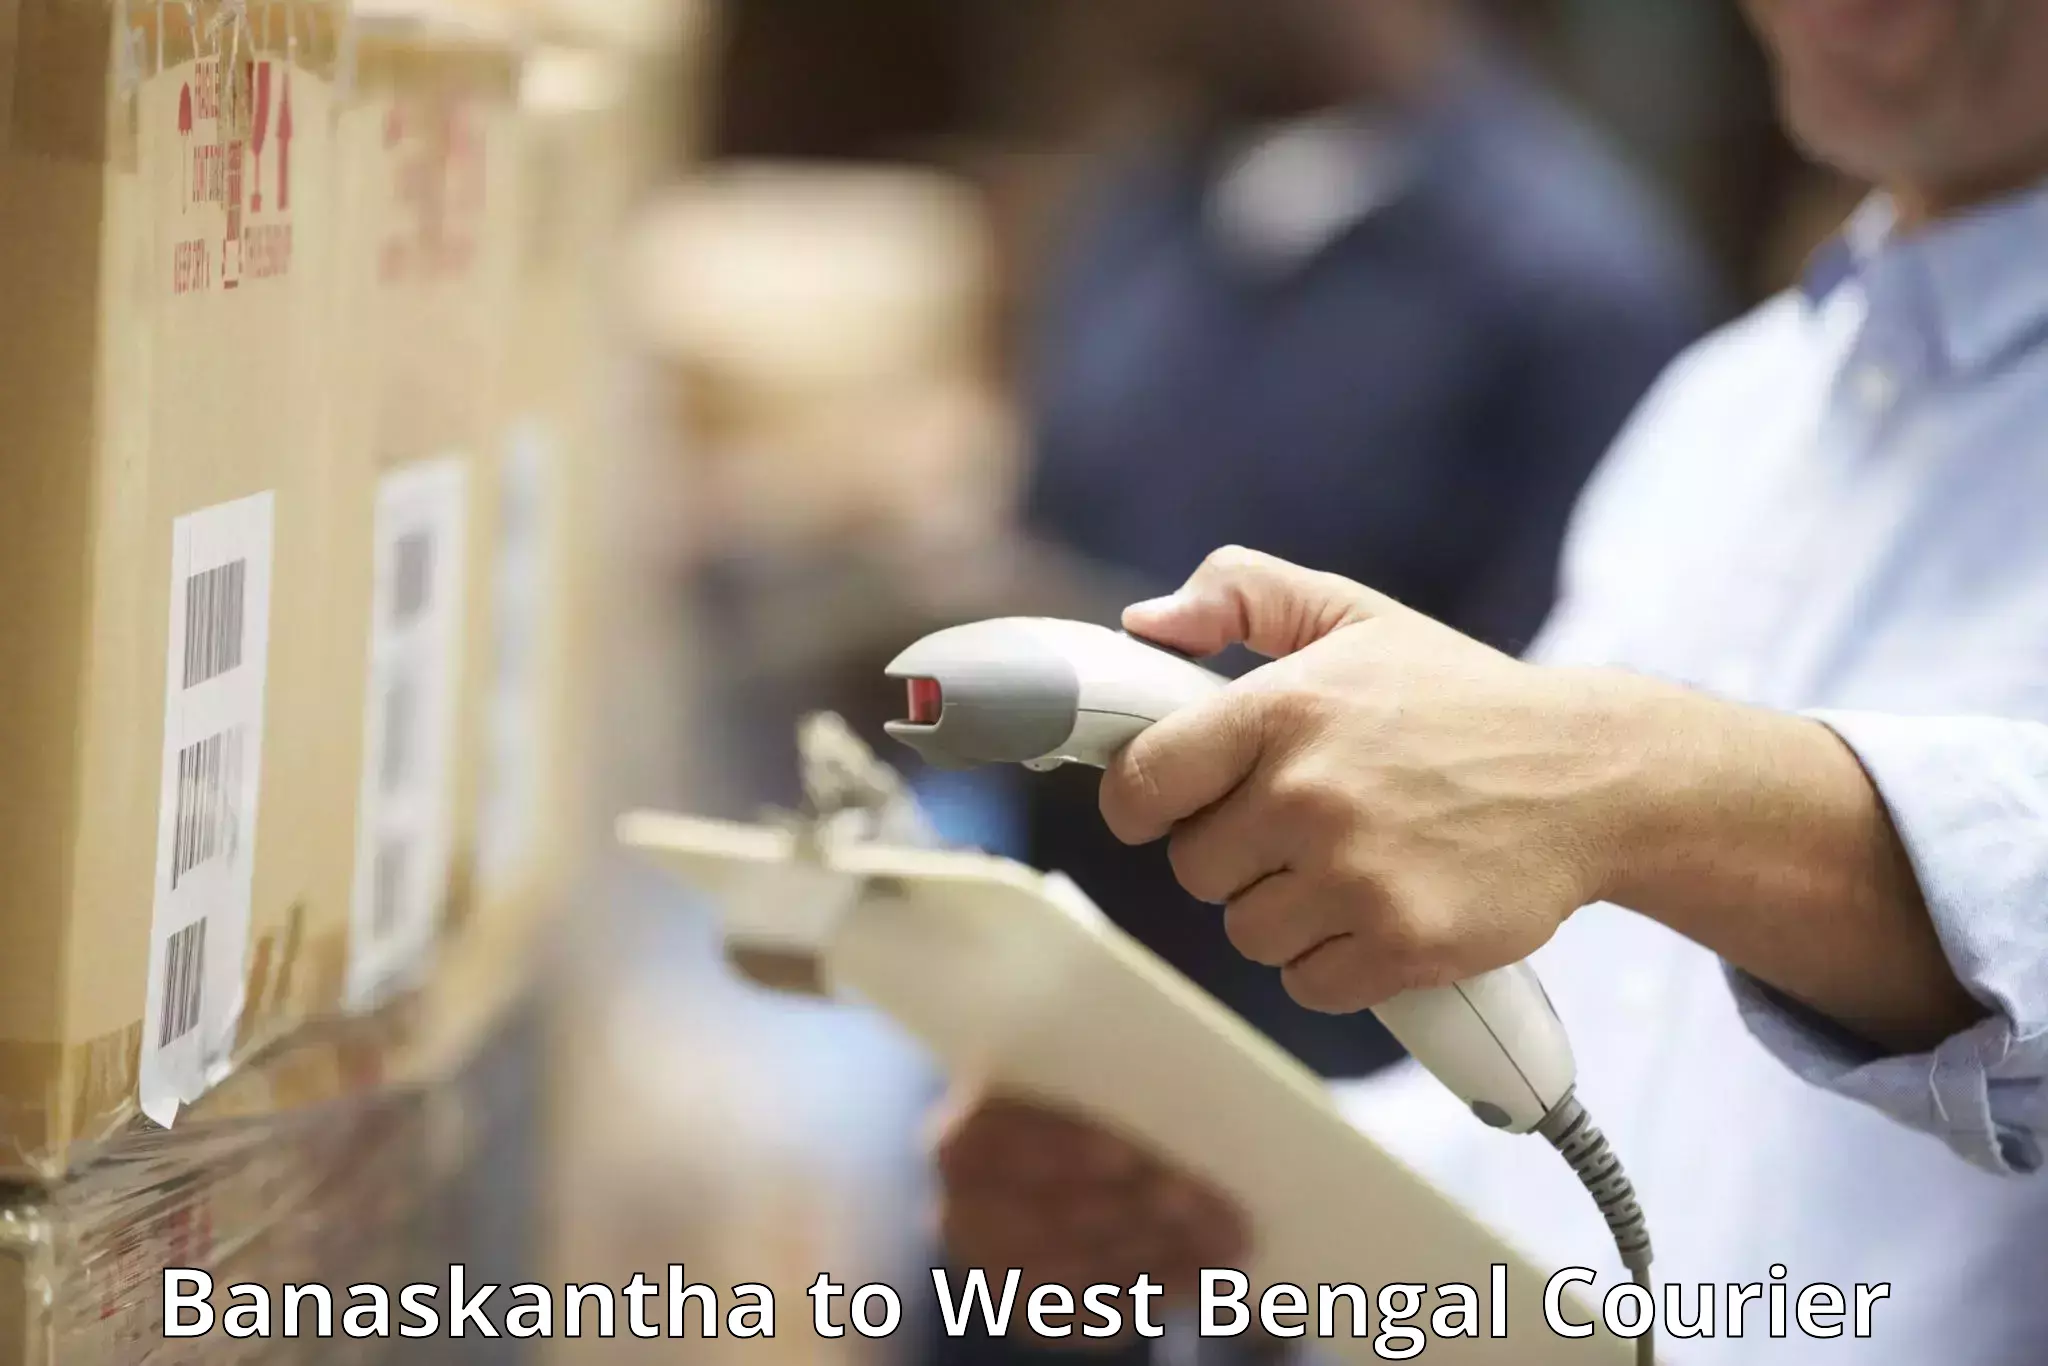 Luggage delivery network Banaskantha to West Bengal